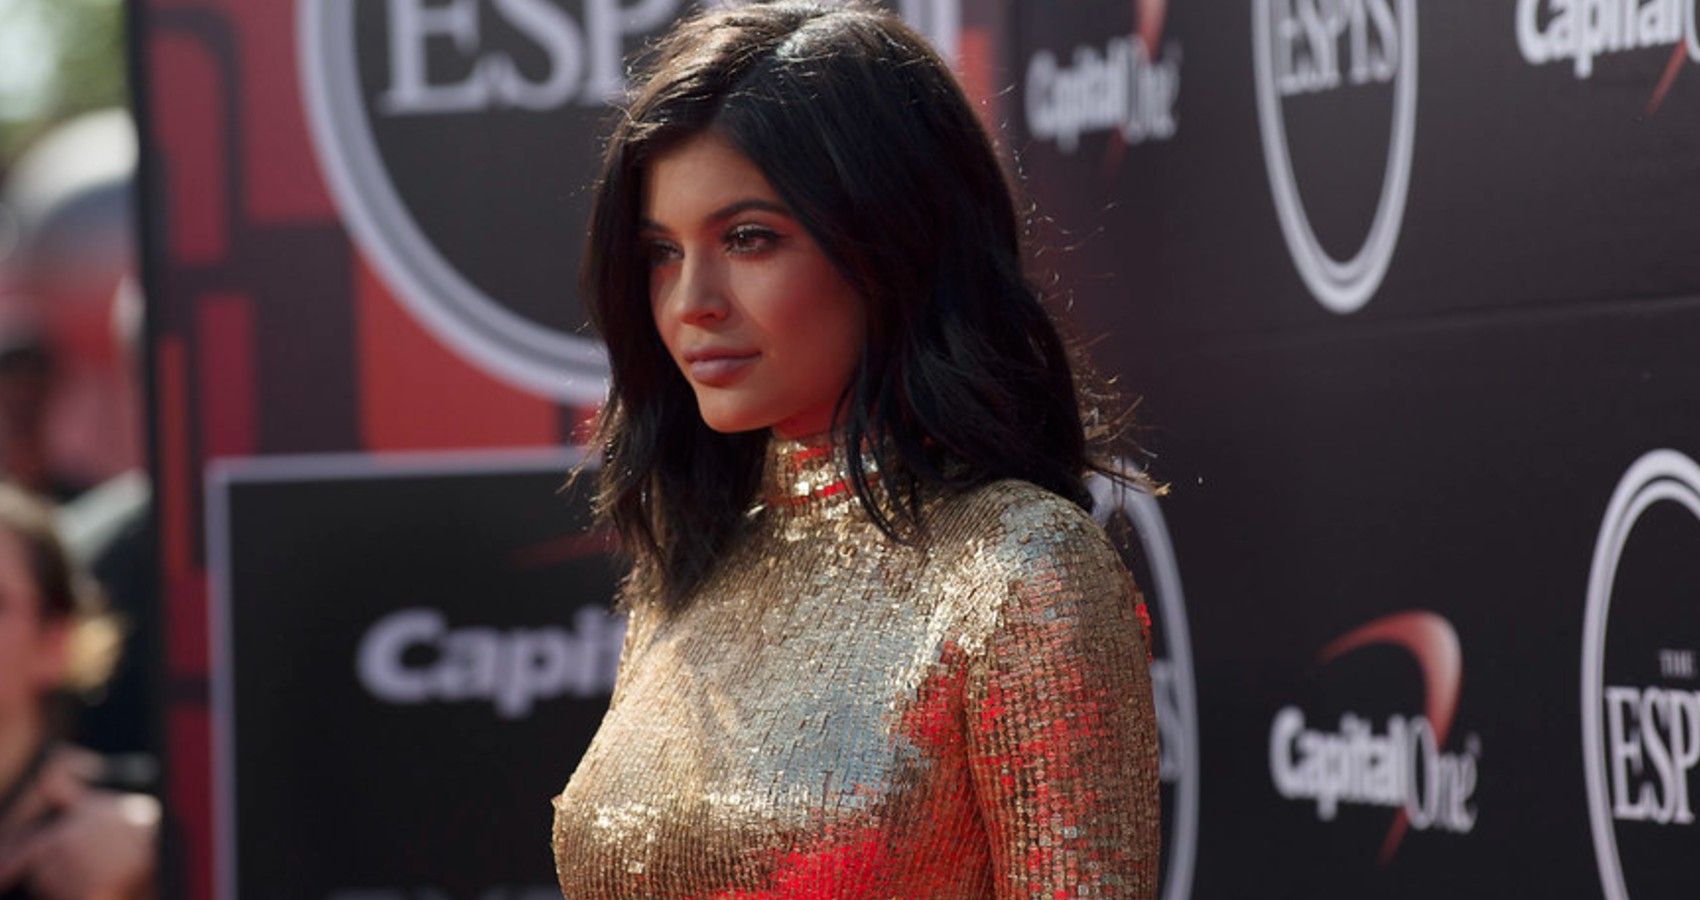 Kylie Jenner Standing On The Red Carpet